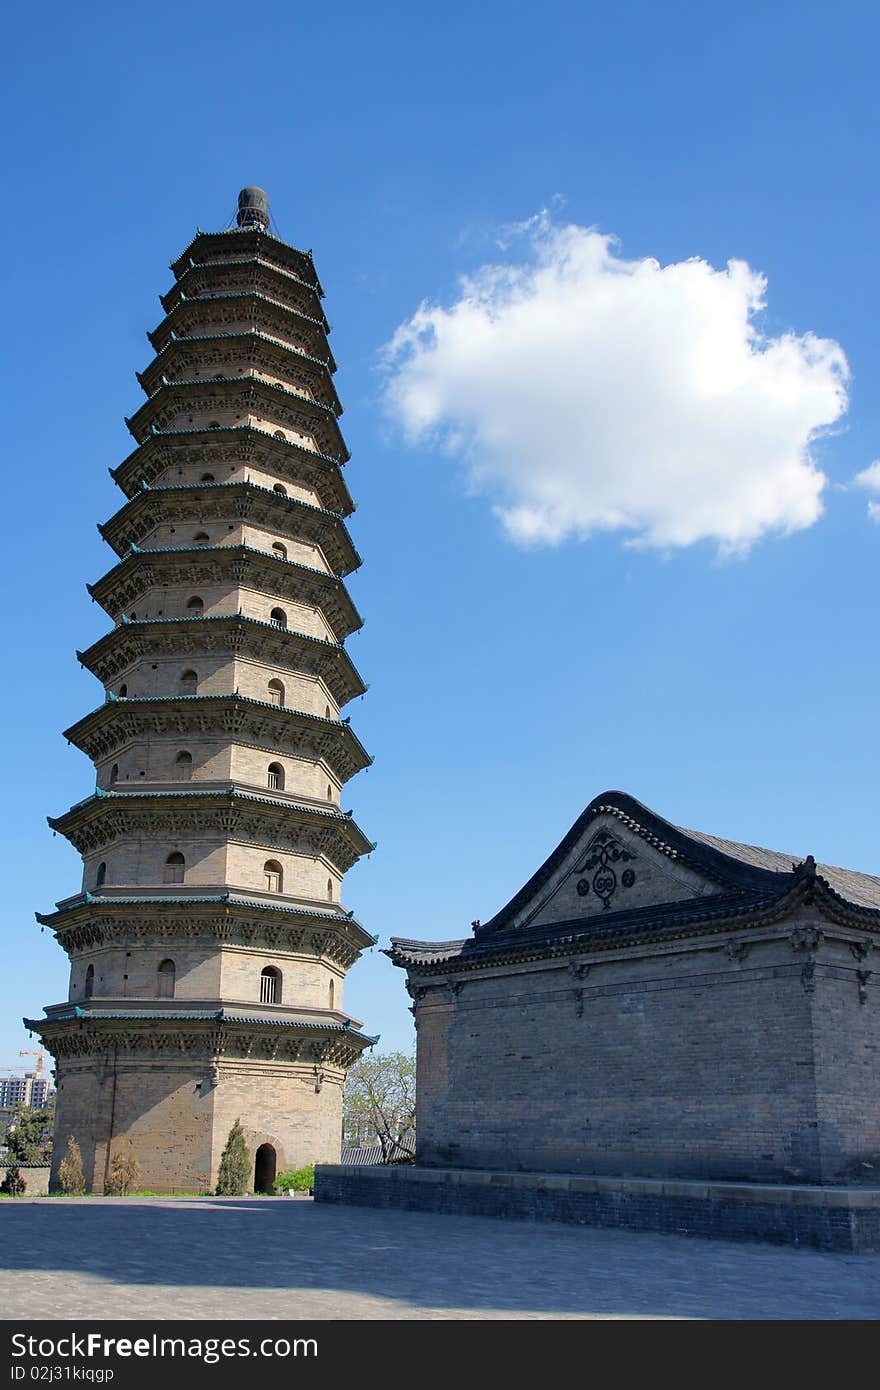 Double Pagoda Temple is located in Taiyuan City, Shanxi Province, China, also known as Yongzuo Temple. The temple built in the Ming dynasty. The two pagodas are landmark buildings in Taiyuan.